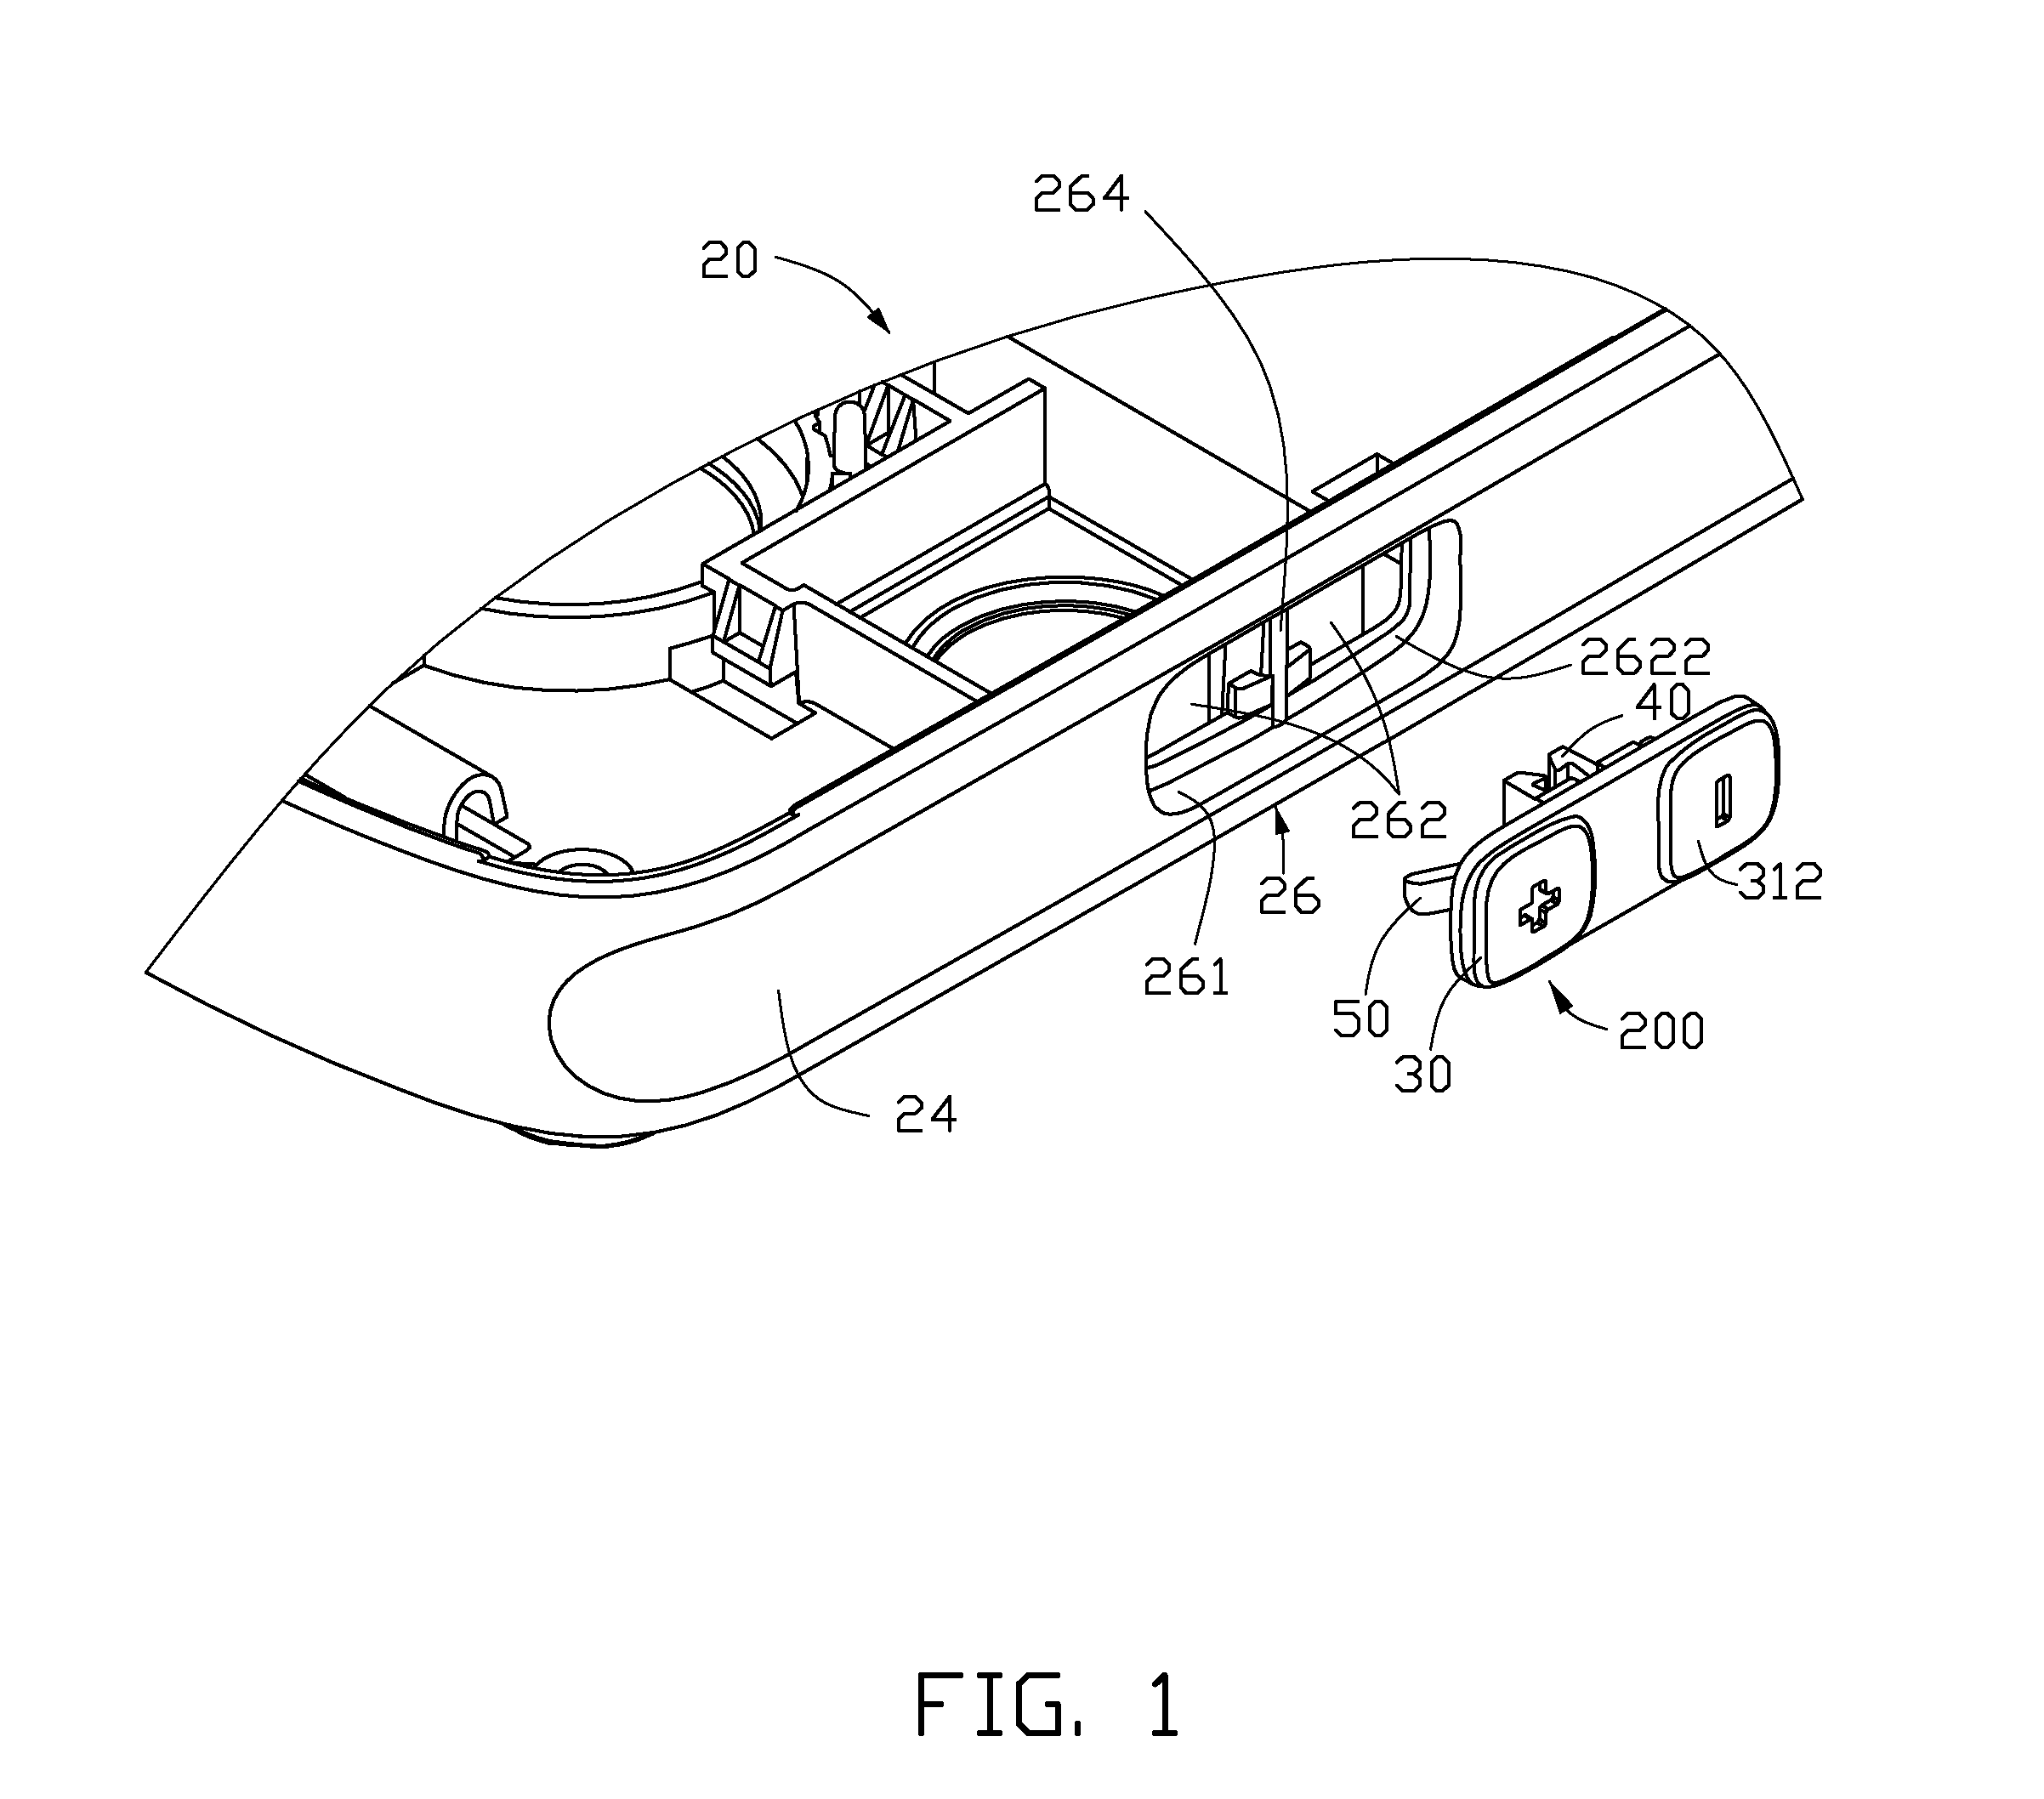 Rocking key button assembly and electronic device using the same